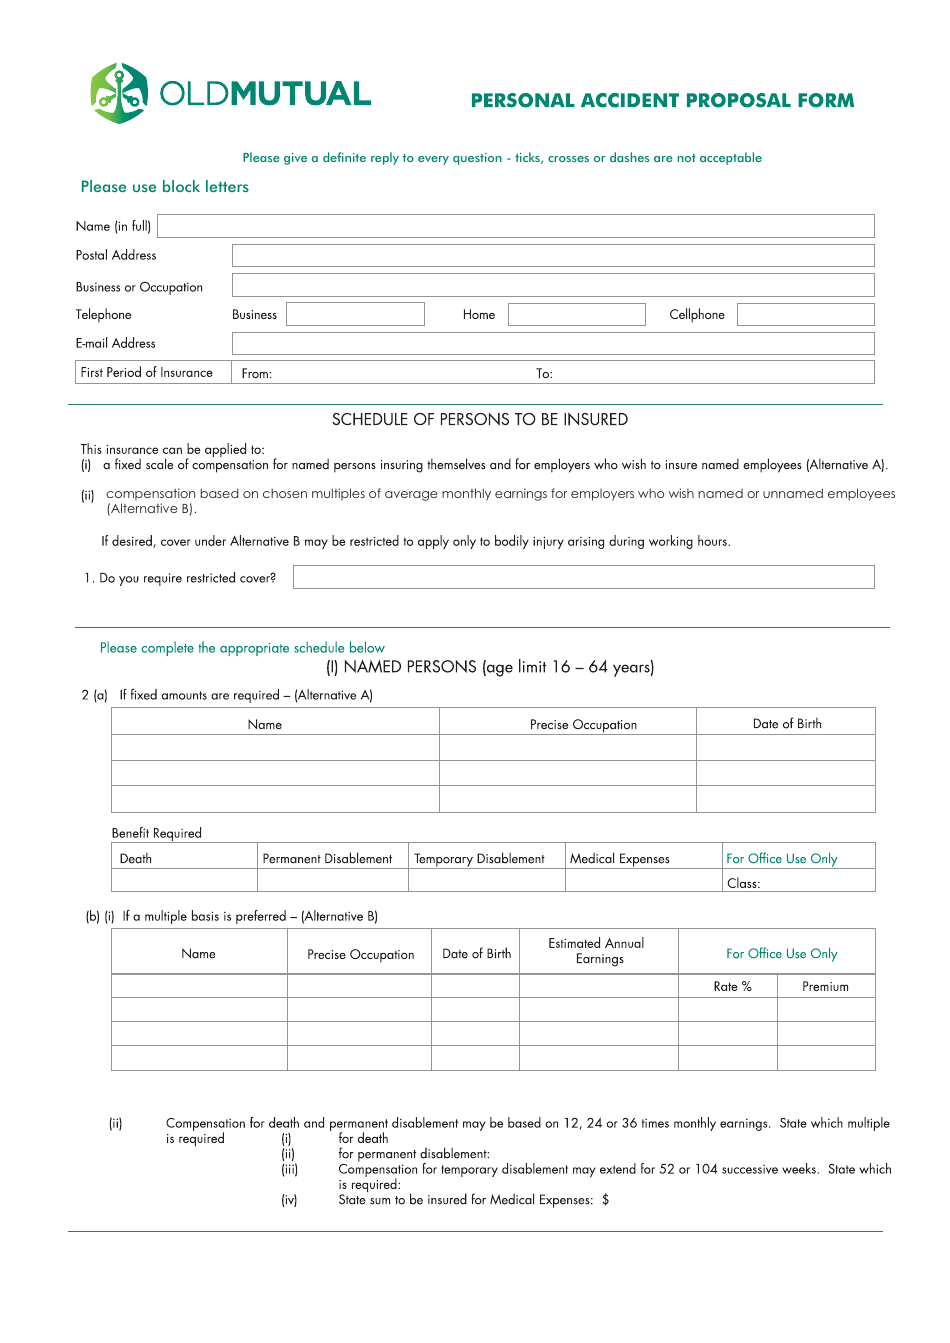 Personal Accident Proposal Form - Old Mutual, Page 1